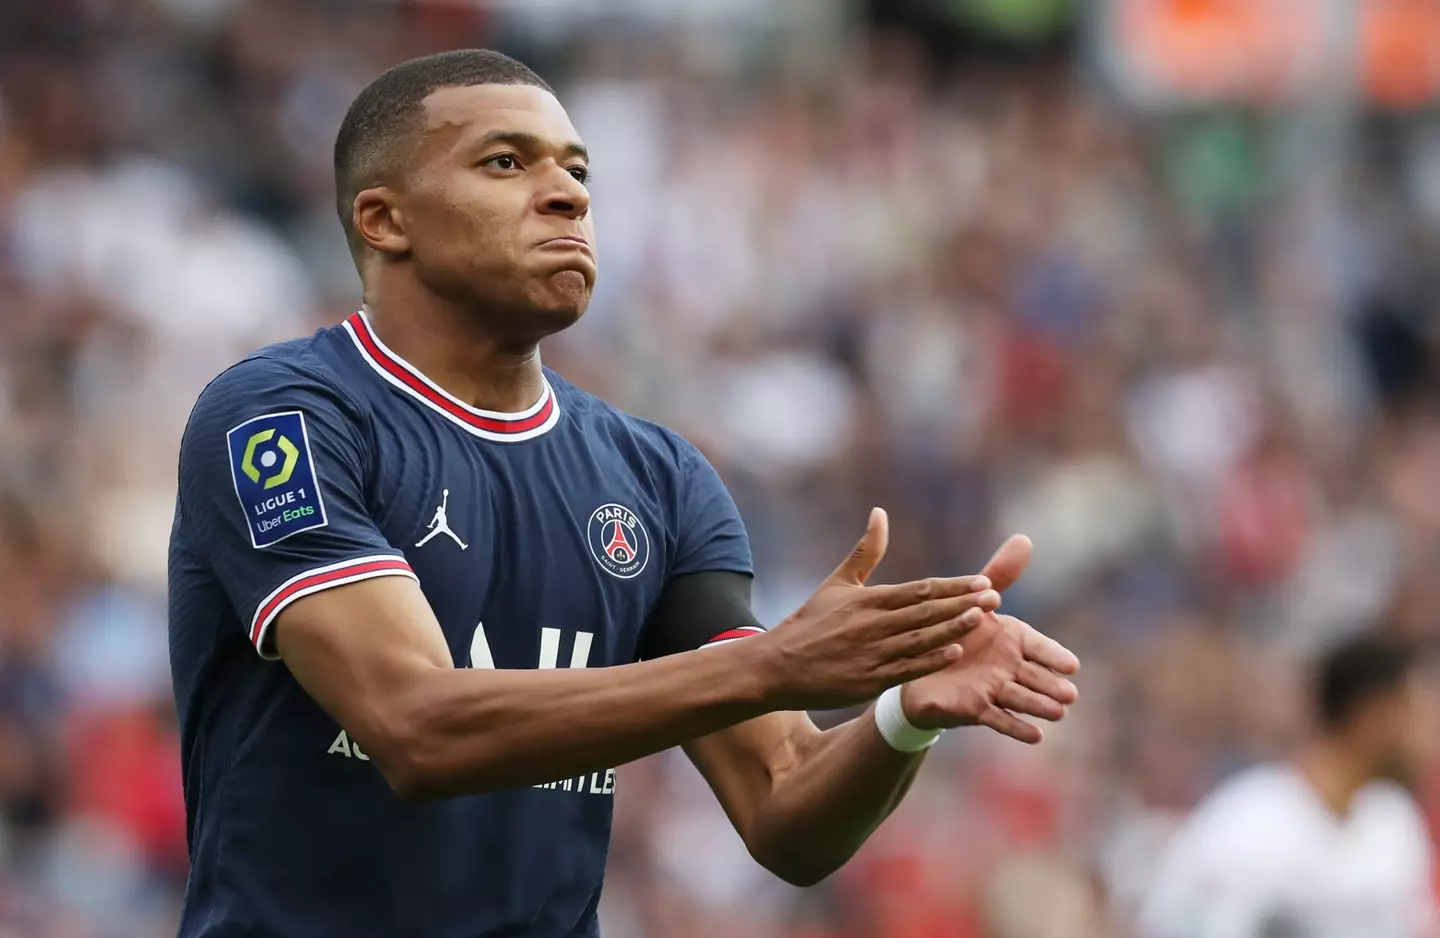 Could Mbappe be the one to break the Ronaldo-Messi duopoly? Image: PA Images